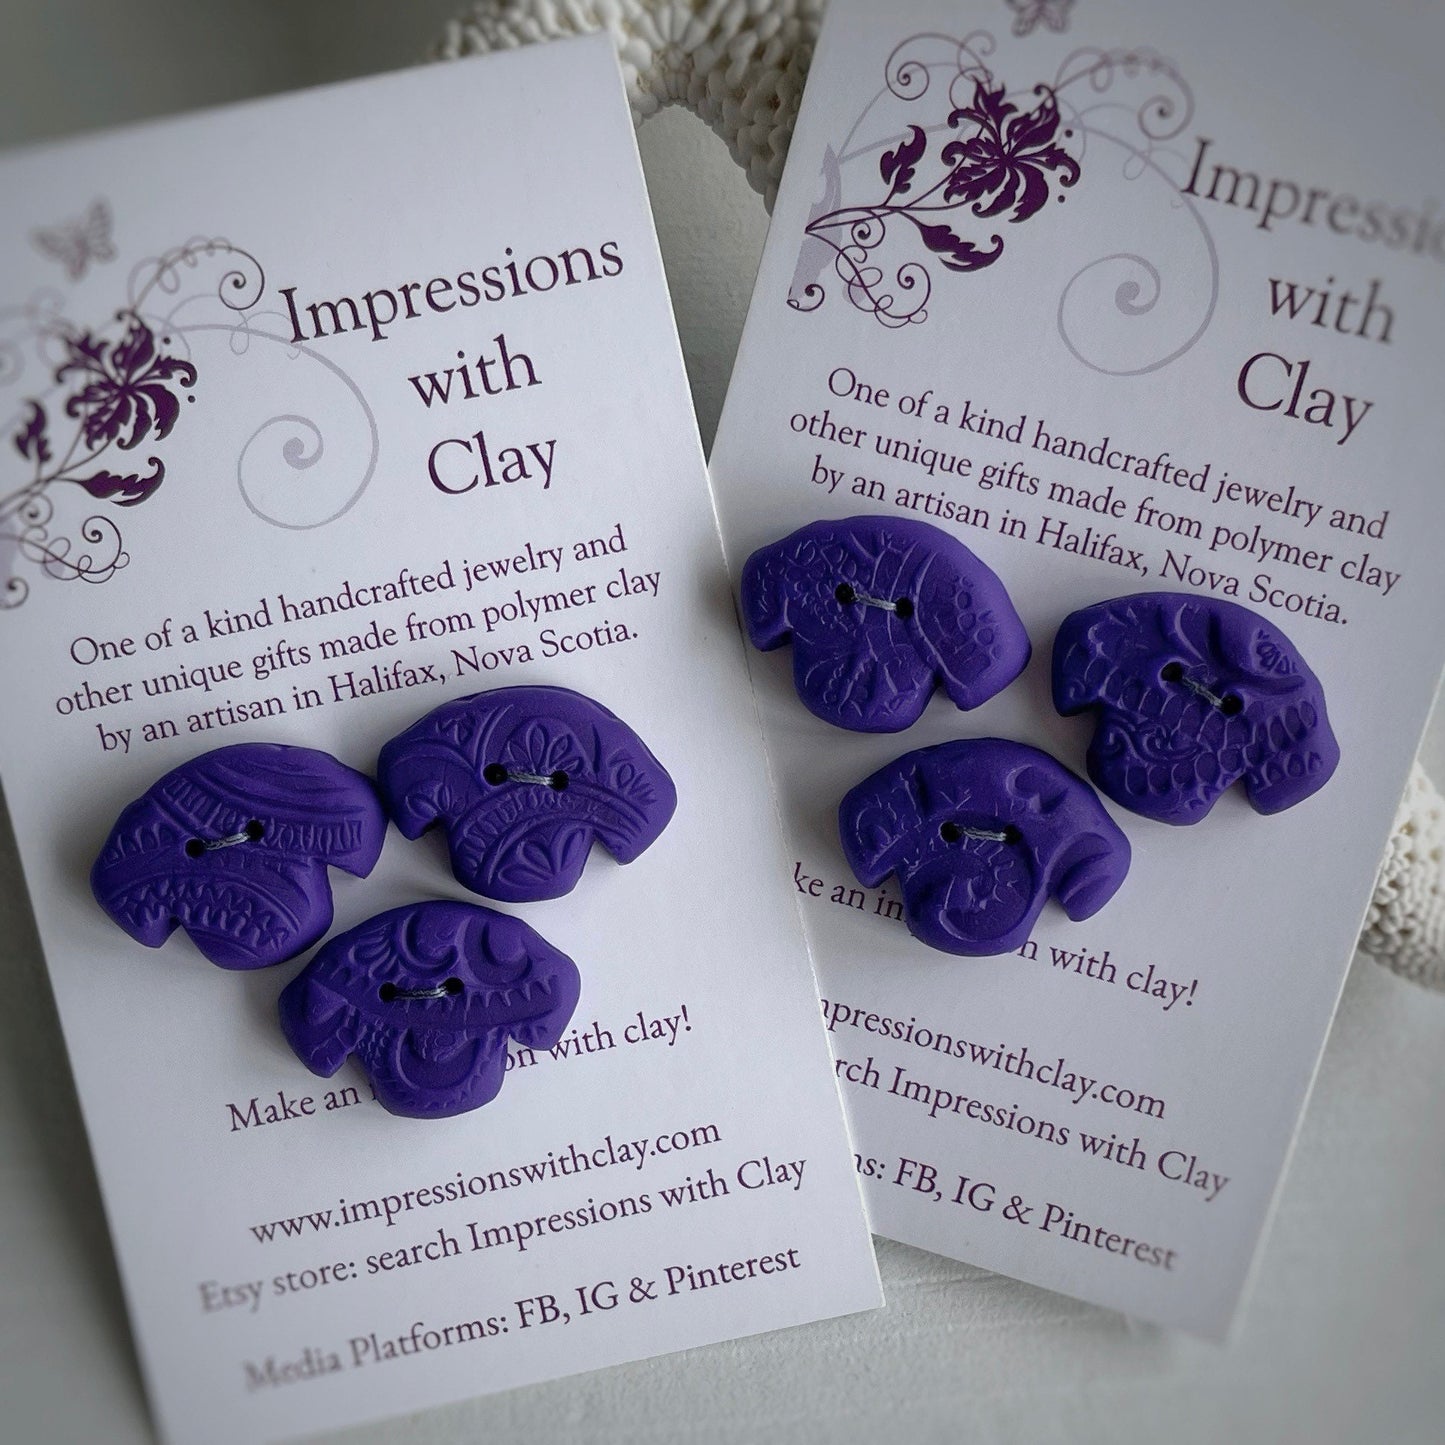 Purple Quality Dog Buttons | with Impression | Double layer Polymer Clay Buttons - set of 3 - 20mm x 14mm